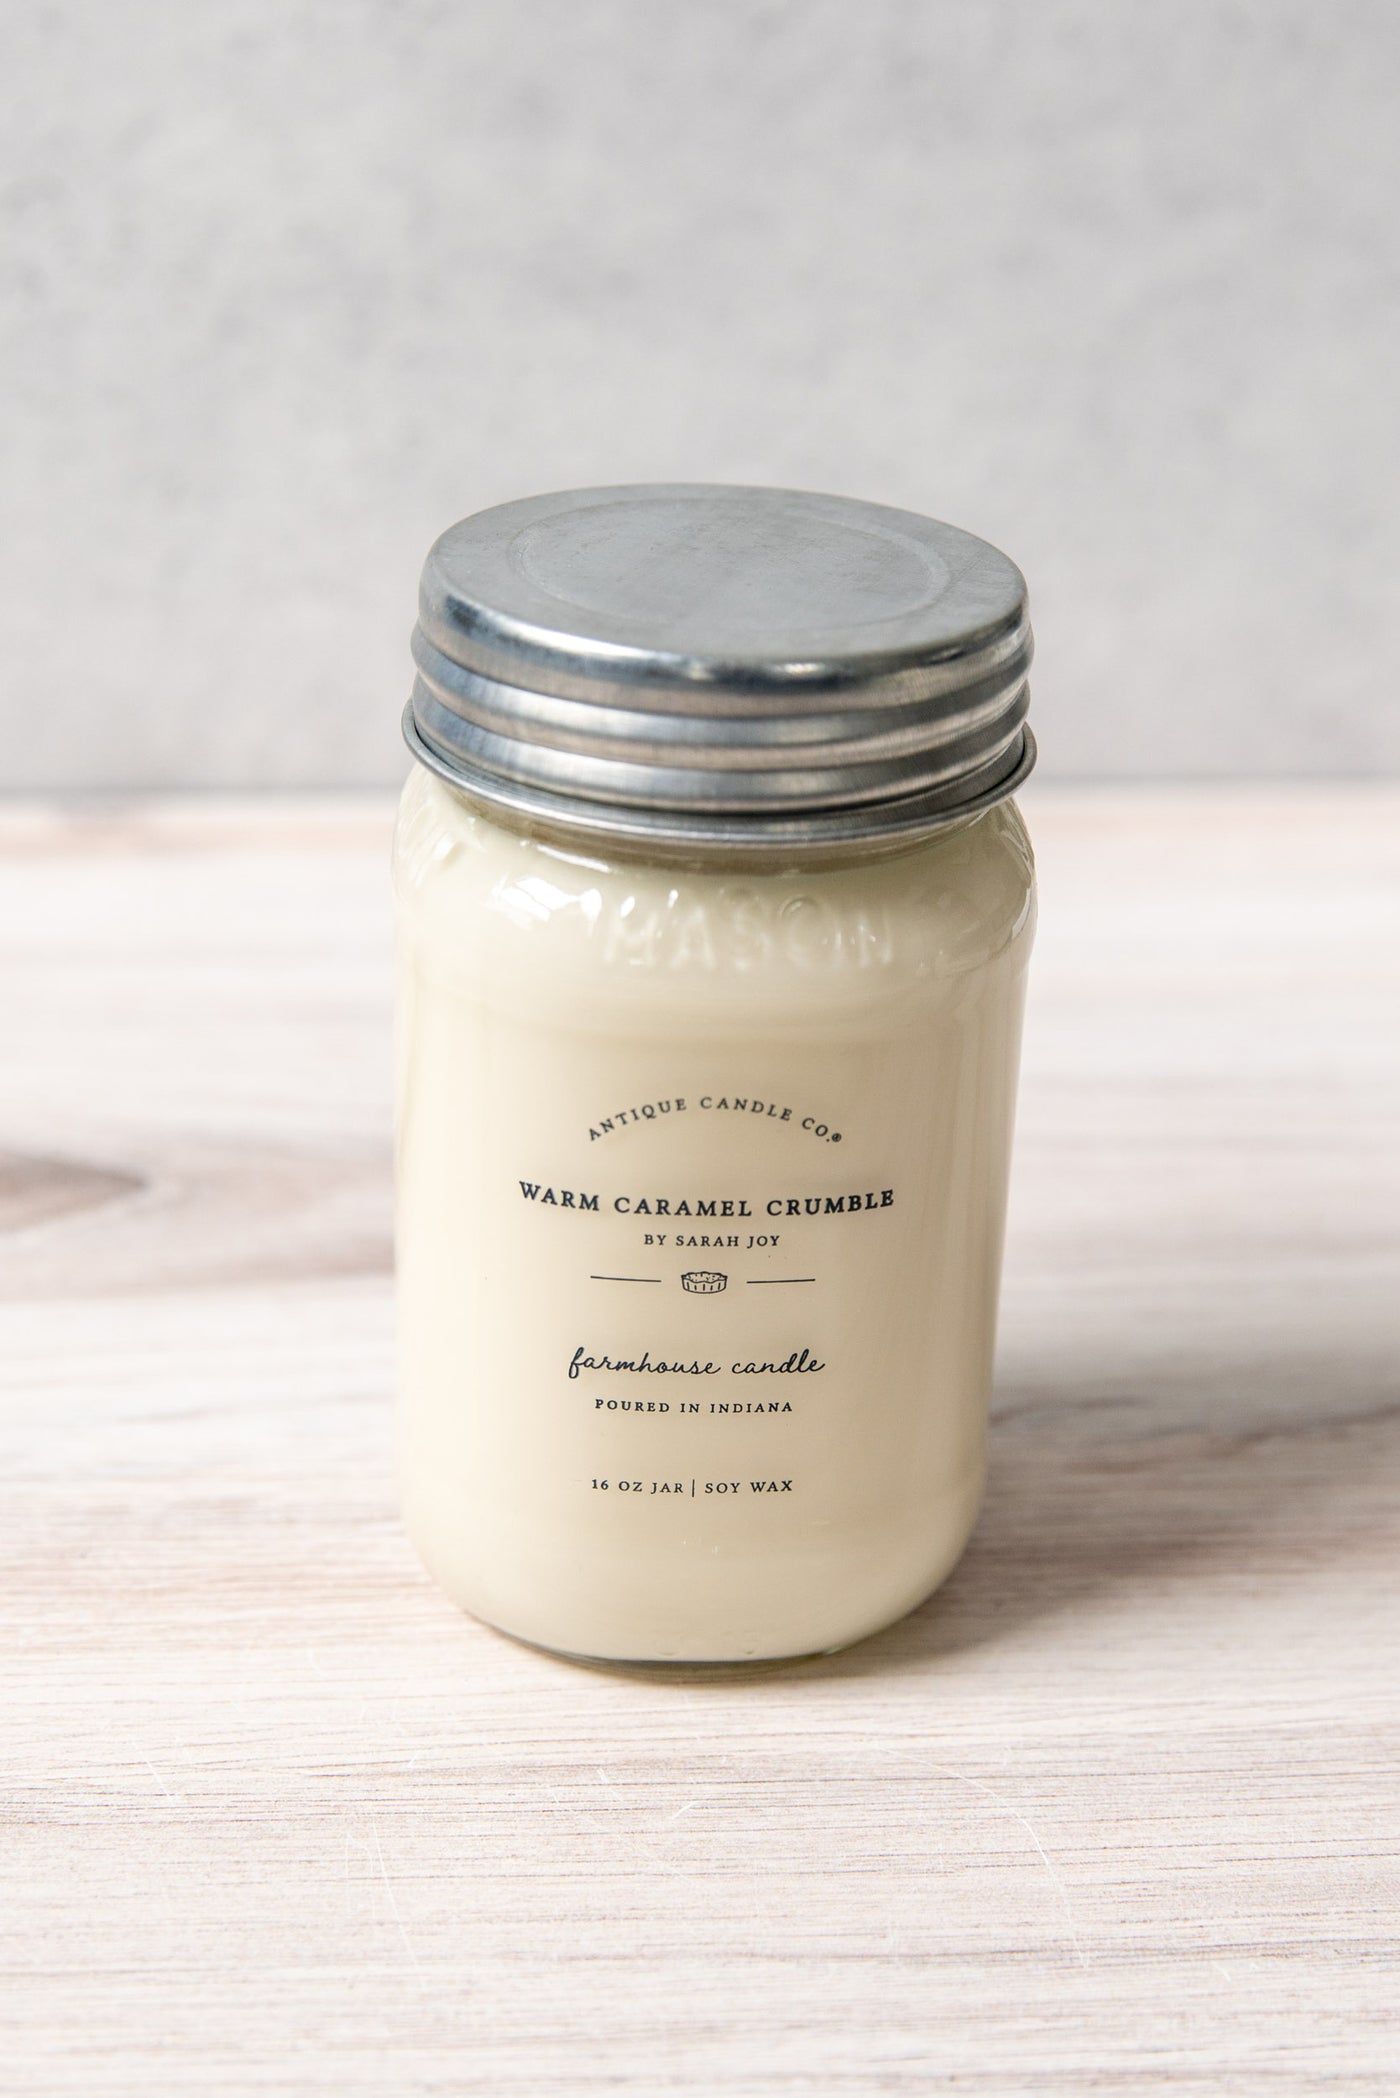 Warm Caramel Crumble | Antique Candle Co. Candle